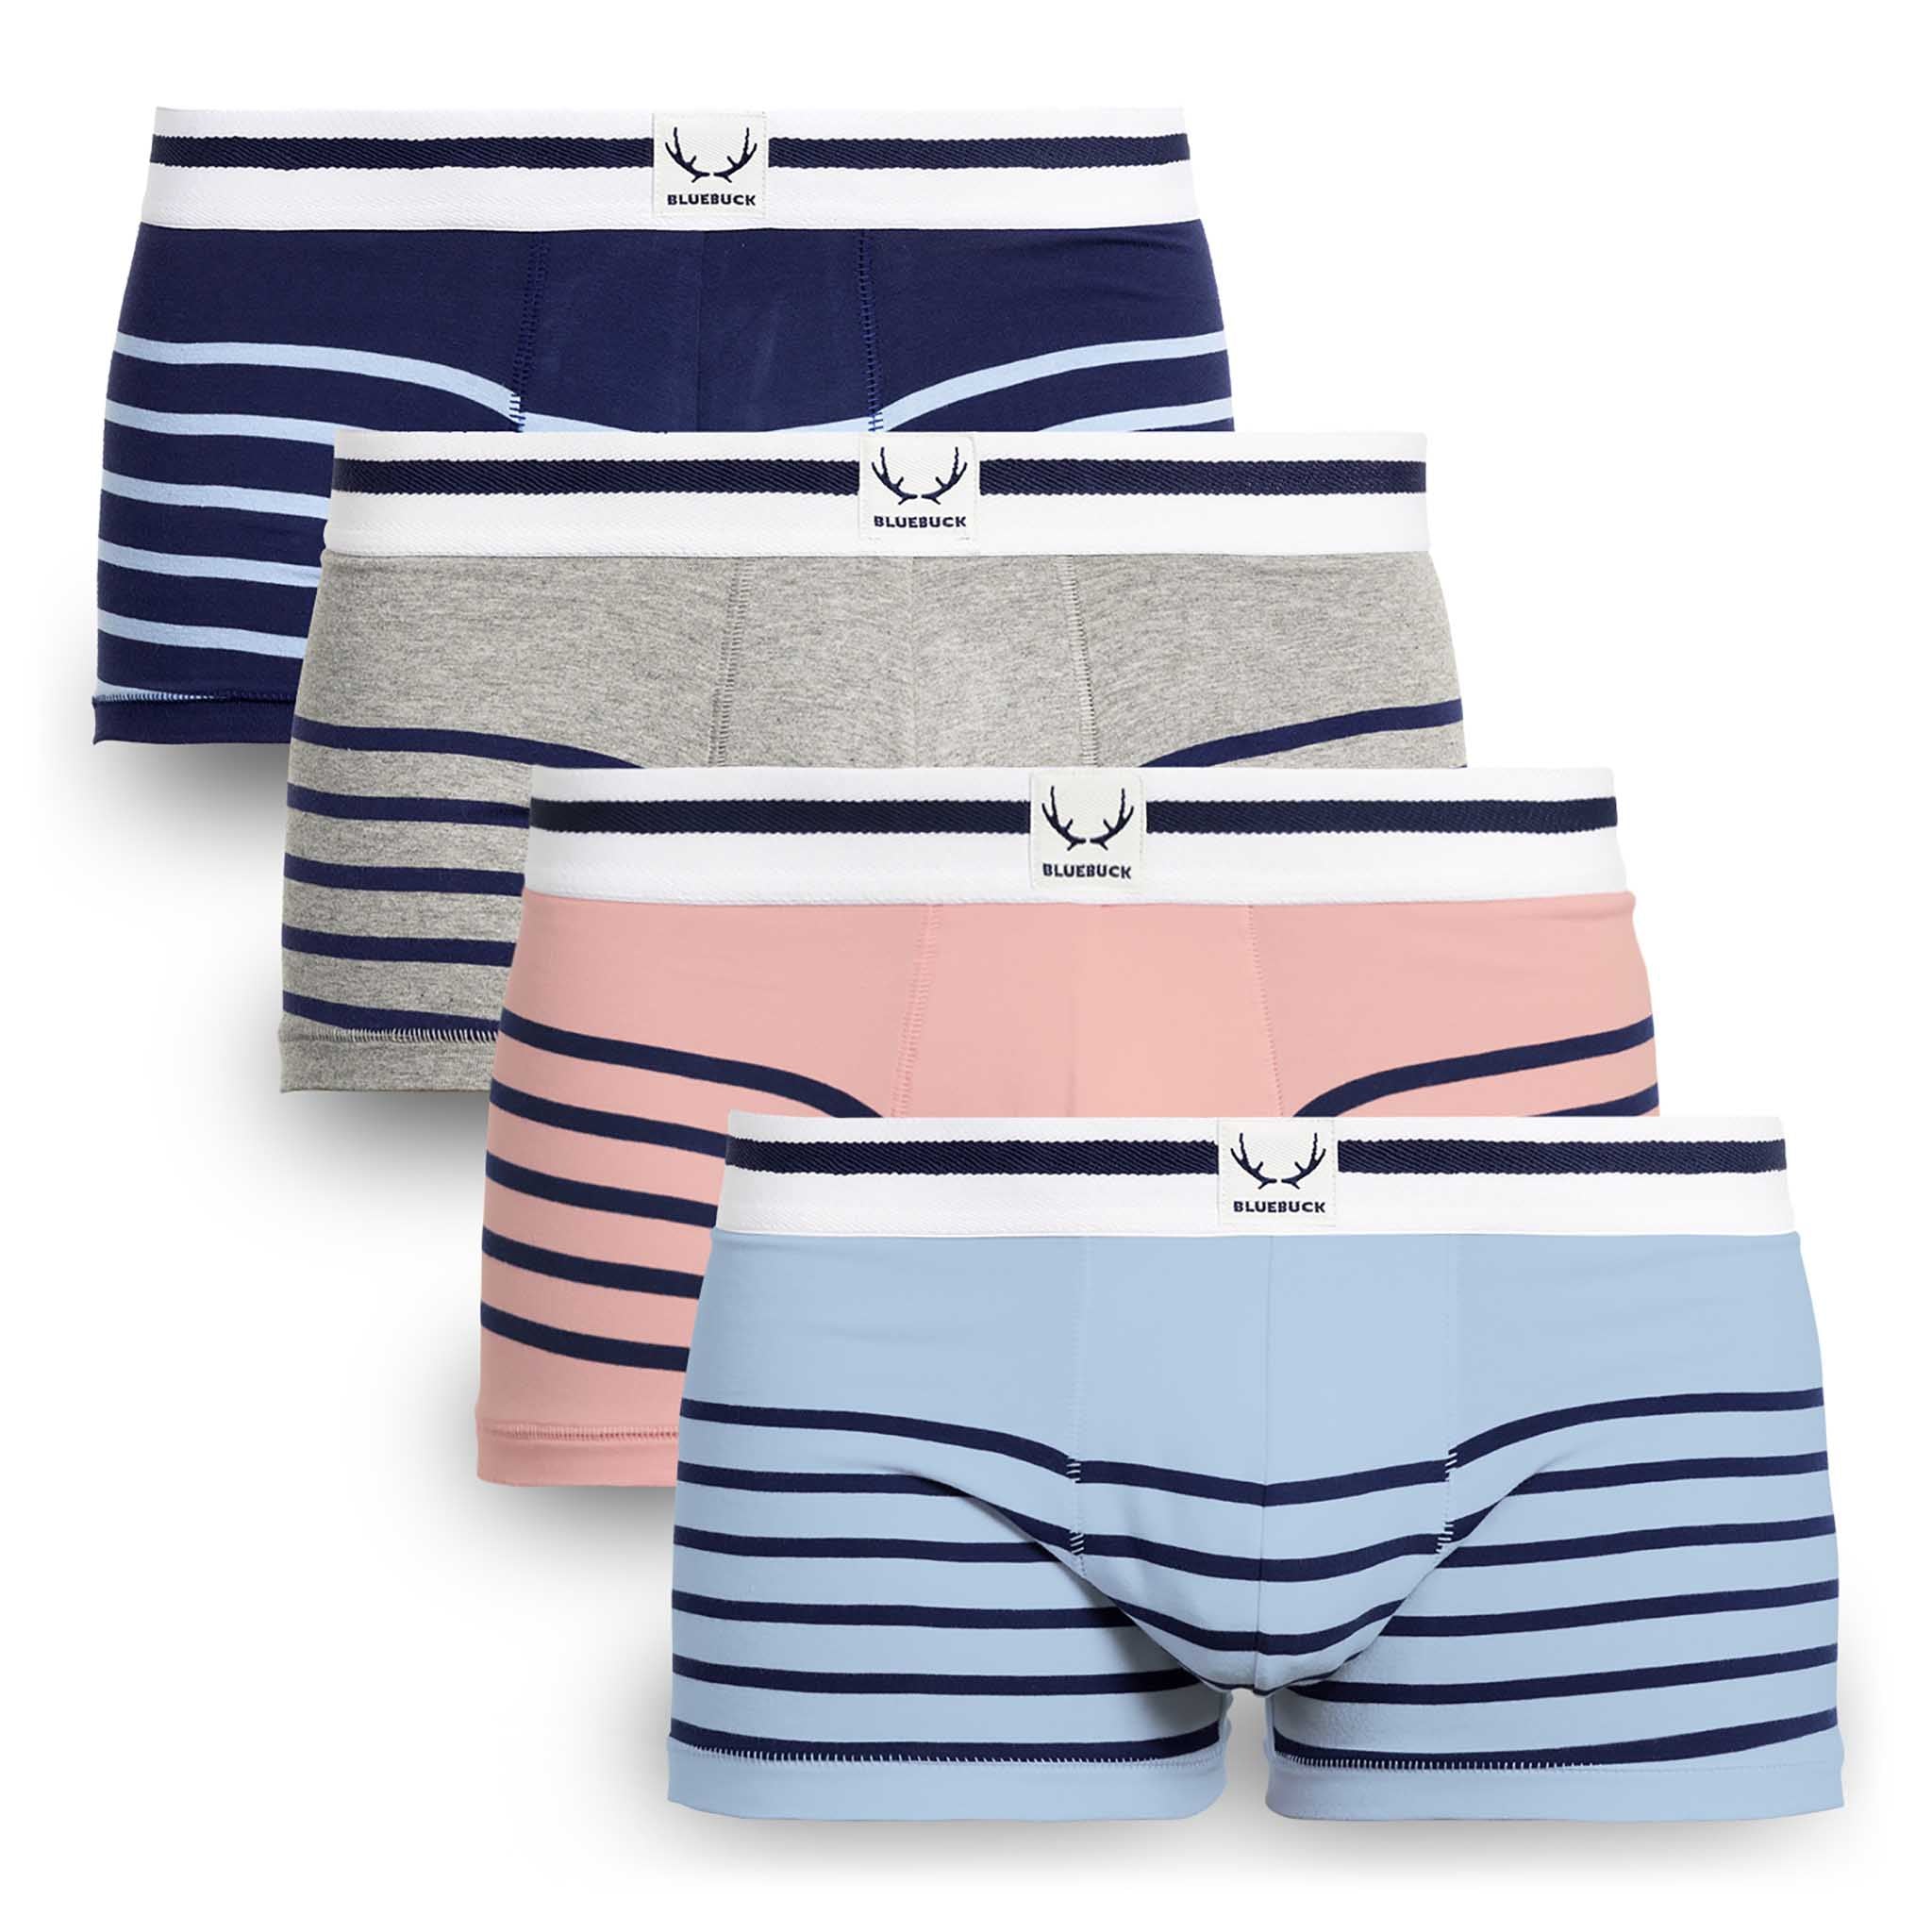 Navy organic cotton boxer shorts 4 pack from Bluebuck